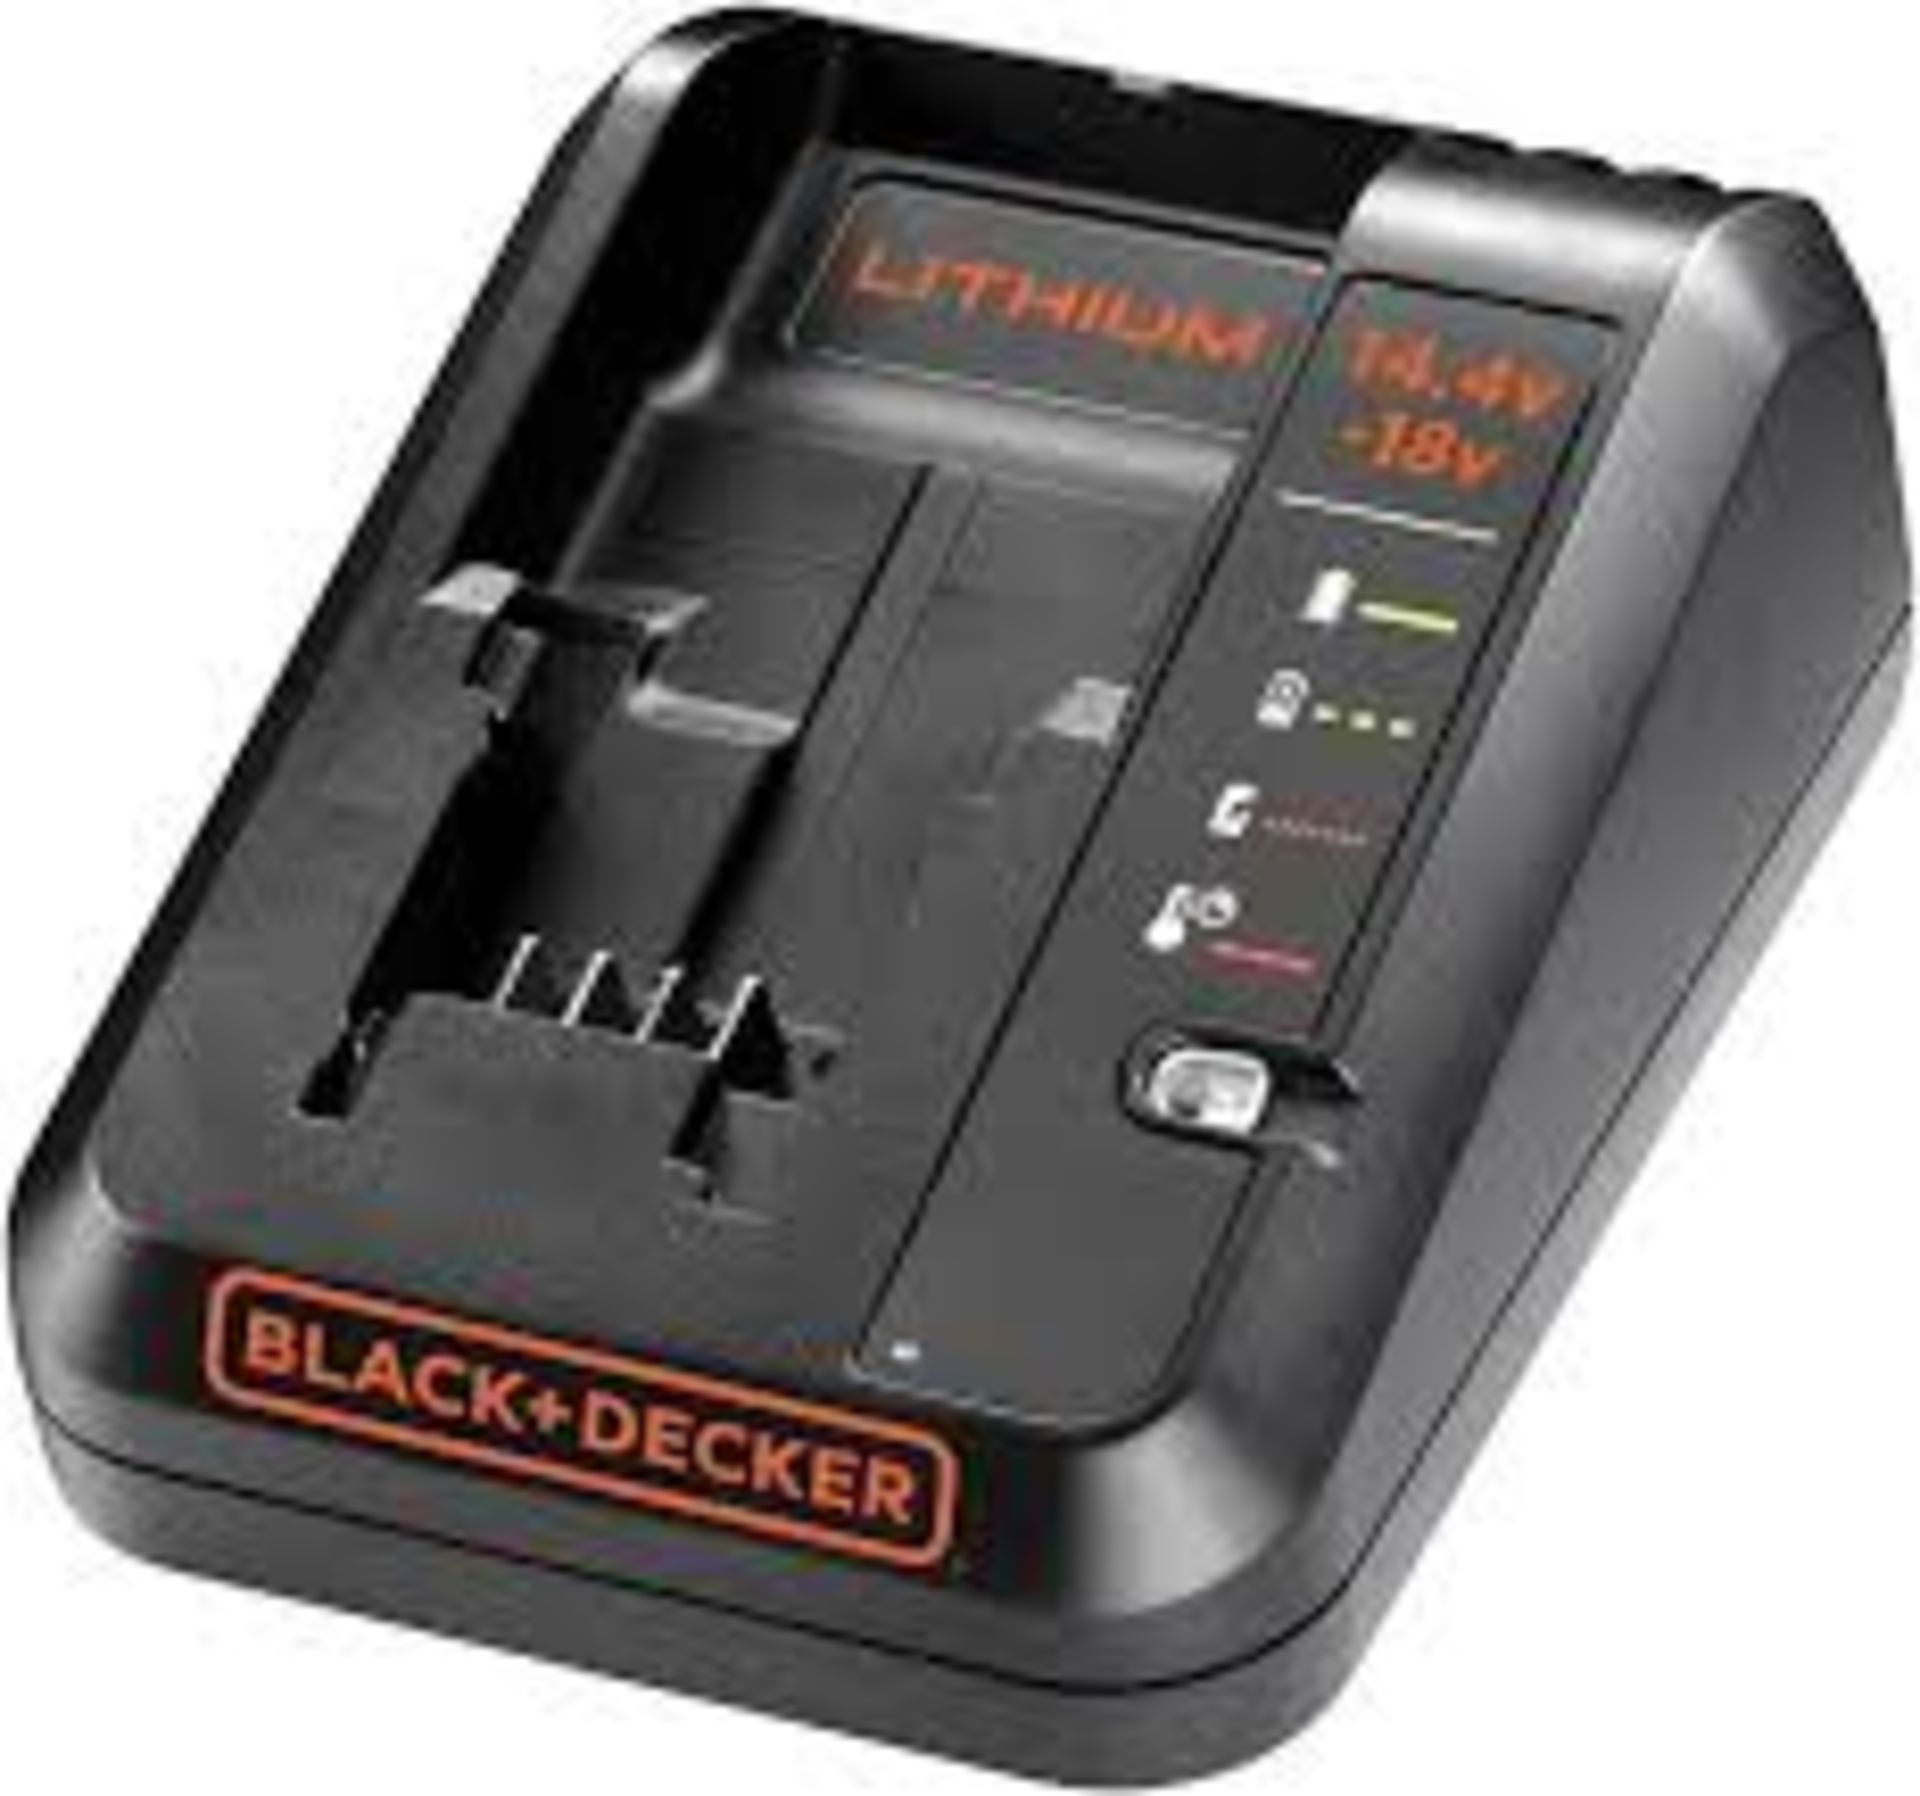 BLACK+DECKER 14.4-18V Cordless Fast Charger for Power Tools. - R14.9.